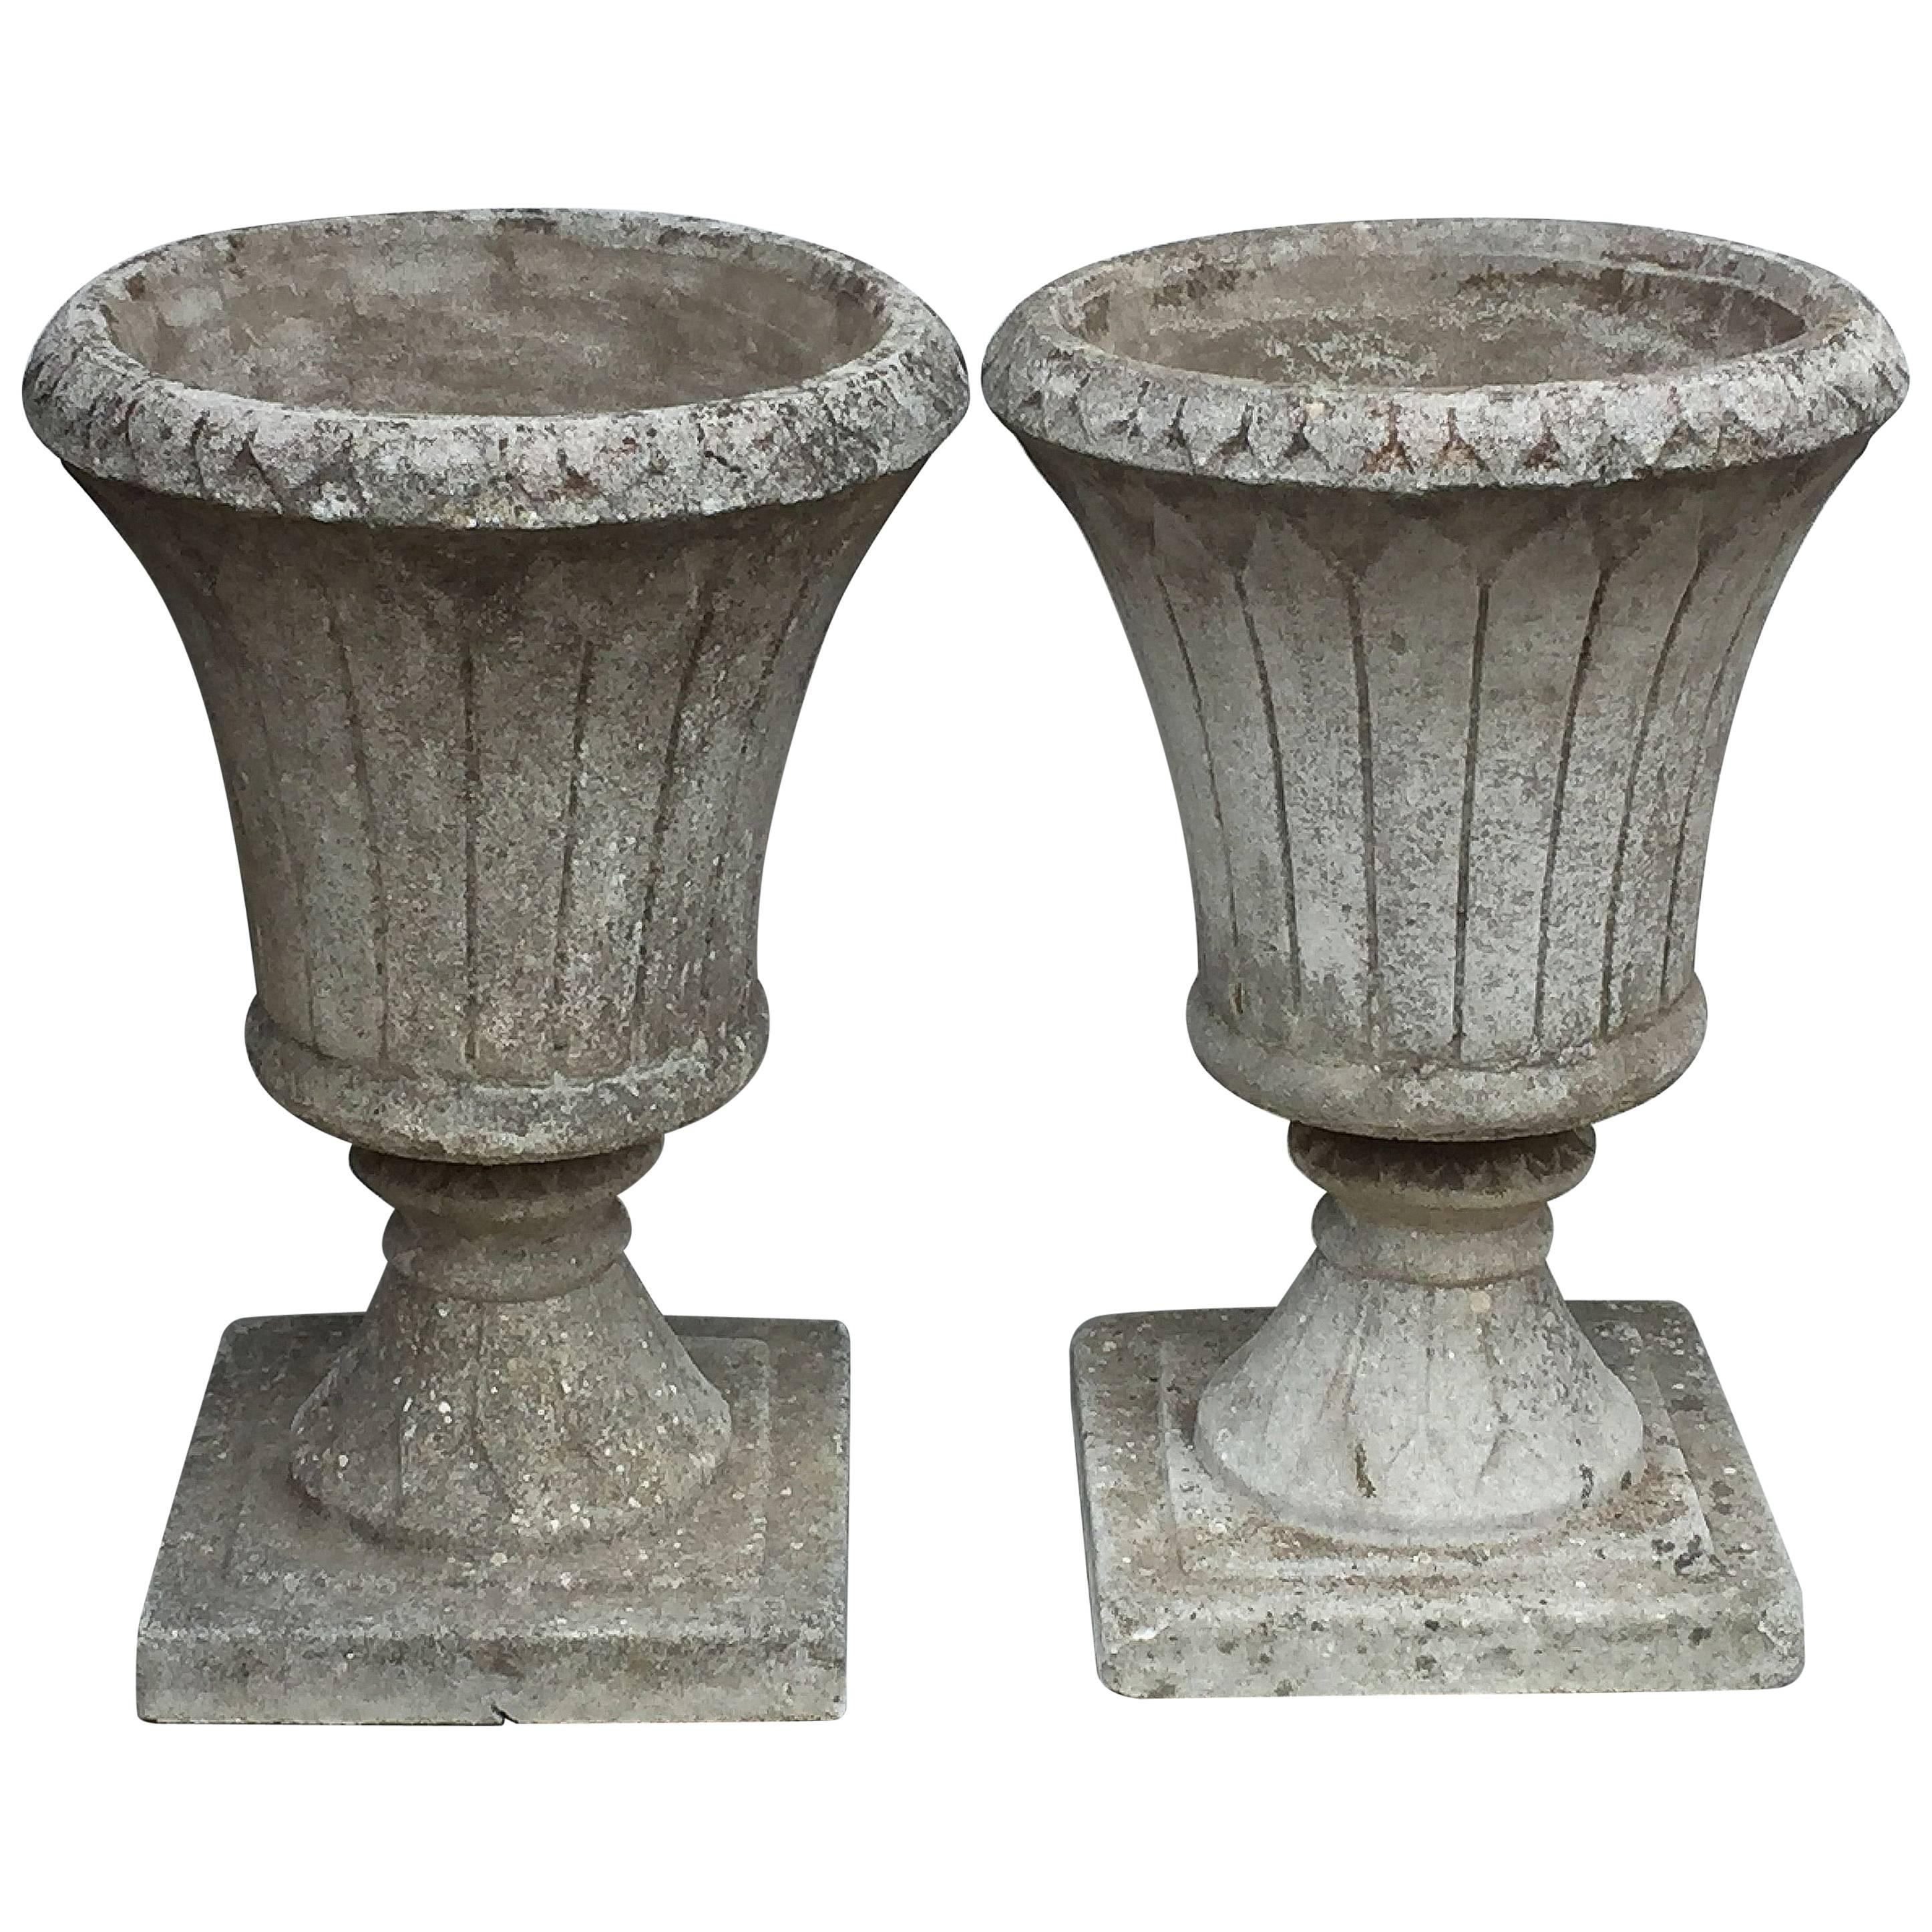 English Garden Stone Urns in the Classical Style 'Individually Priced'